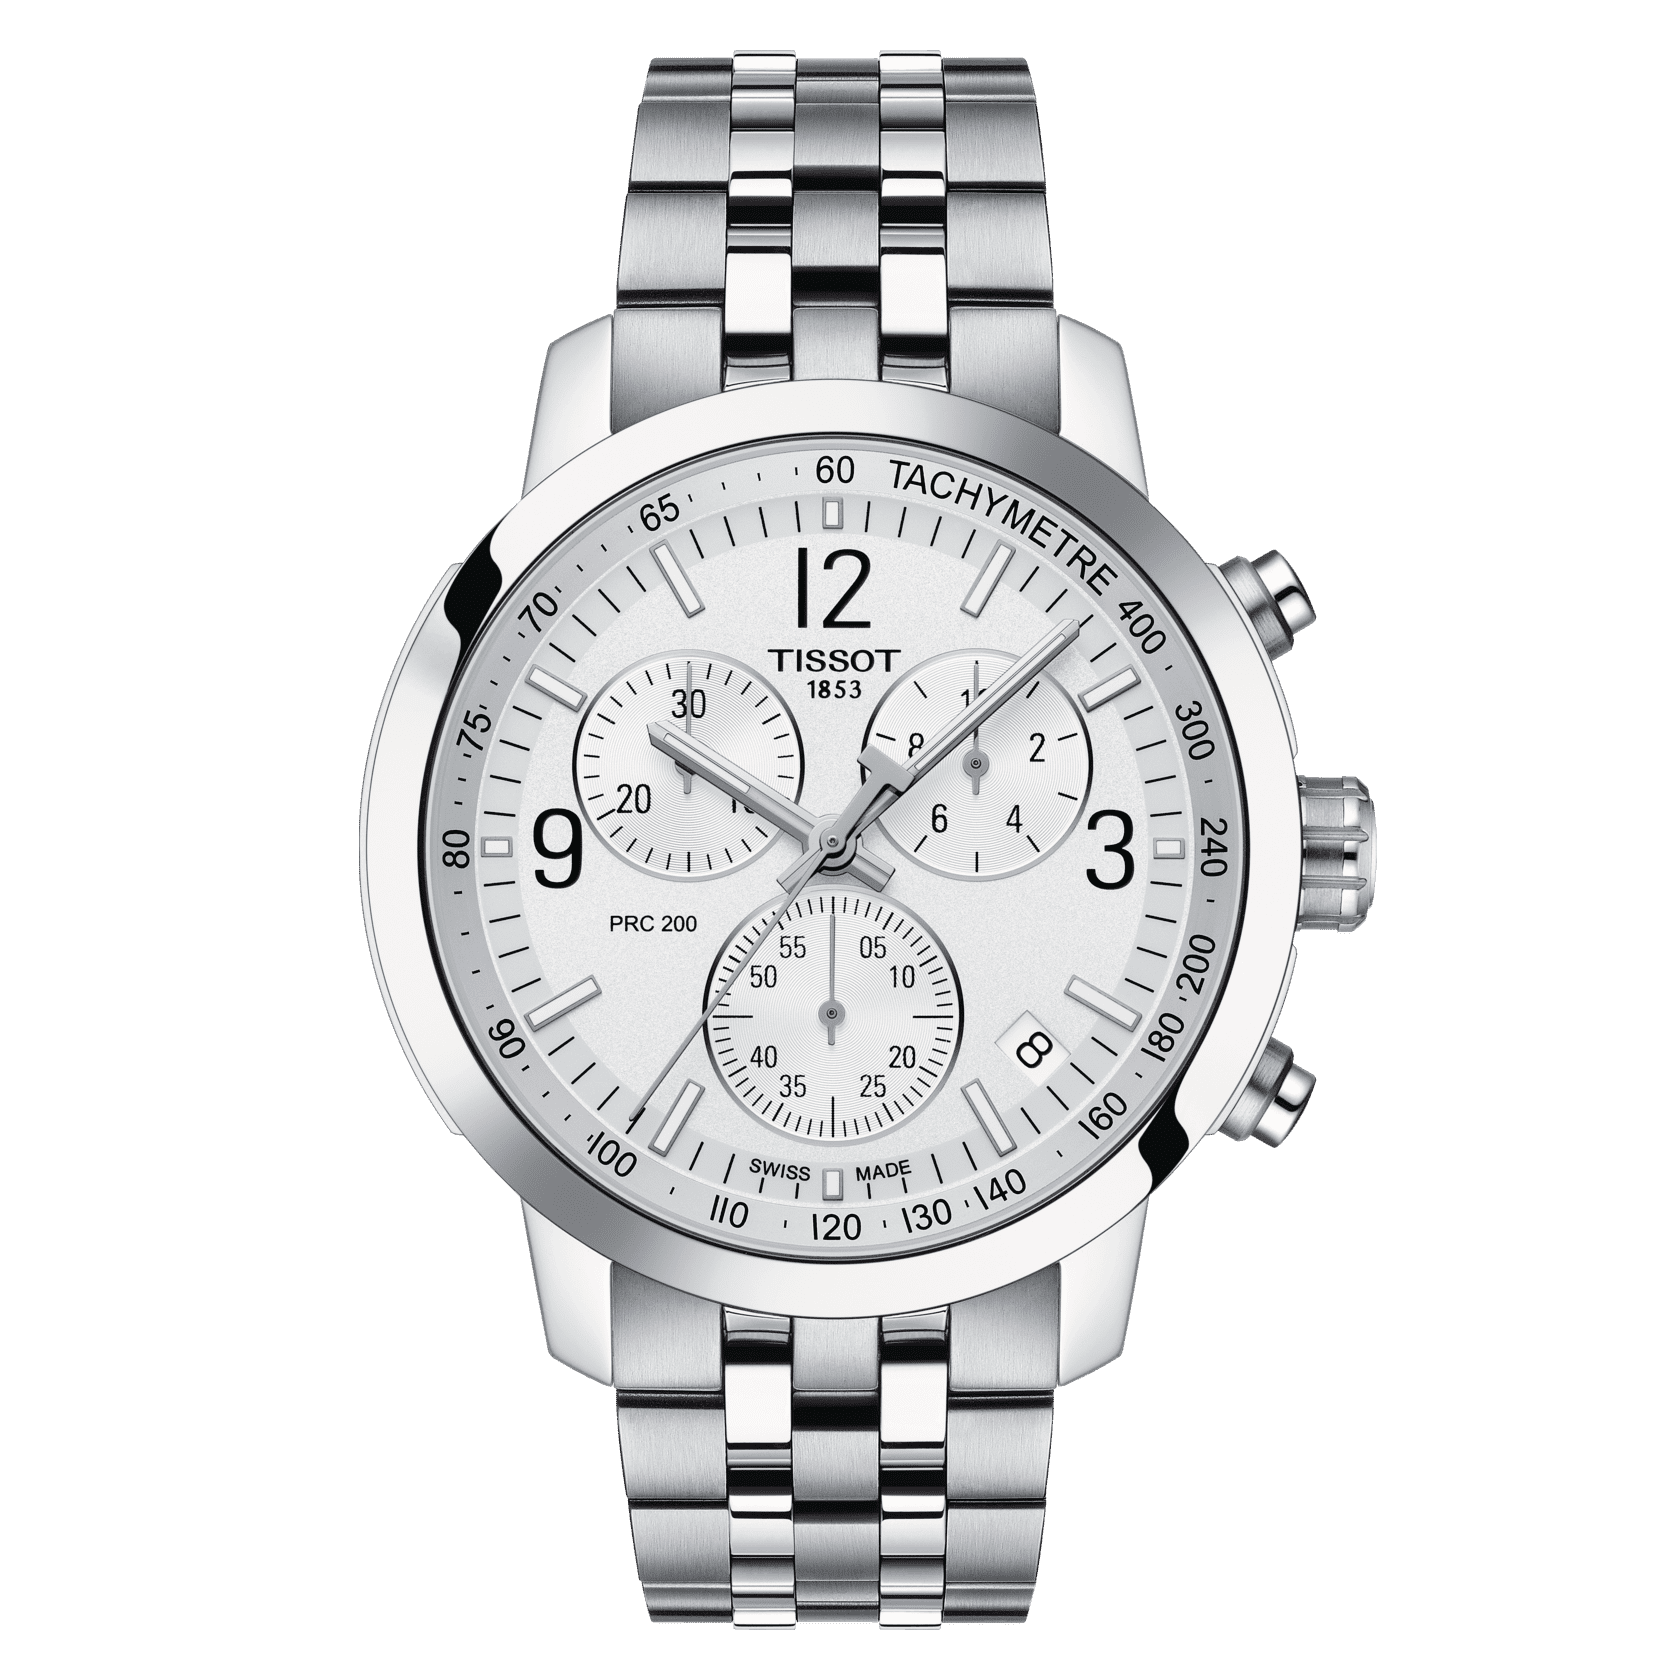 TISSOT PRC 200 CHRONO (T114.417.11.037.00)
Case                             42mmx43mm/316L stainless steel case
Case options                Screw-down crown and caseback
Crystal                          Scratch-resistant sapphire crystal
Dial      Sil